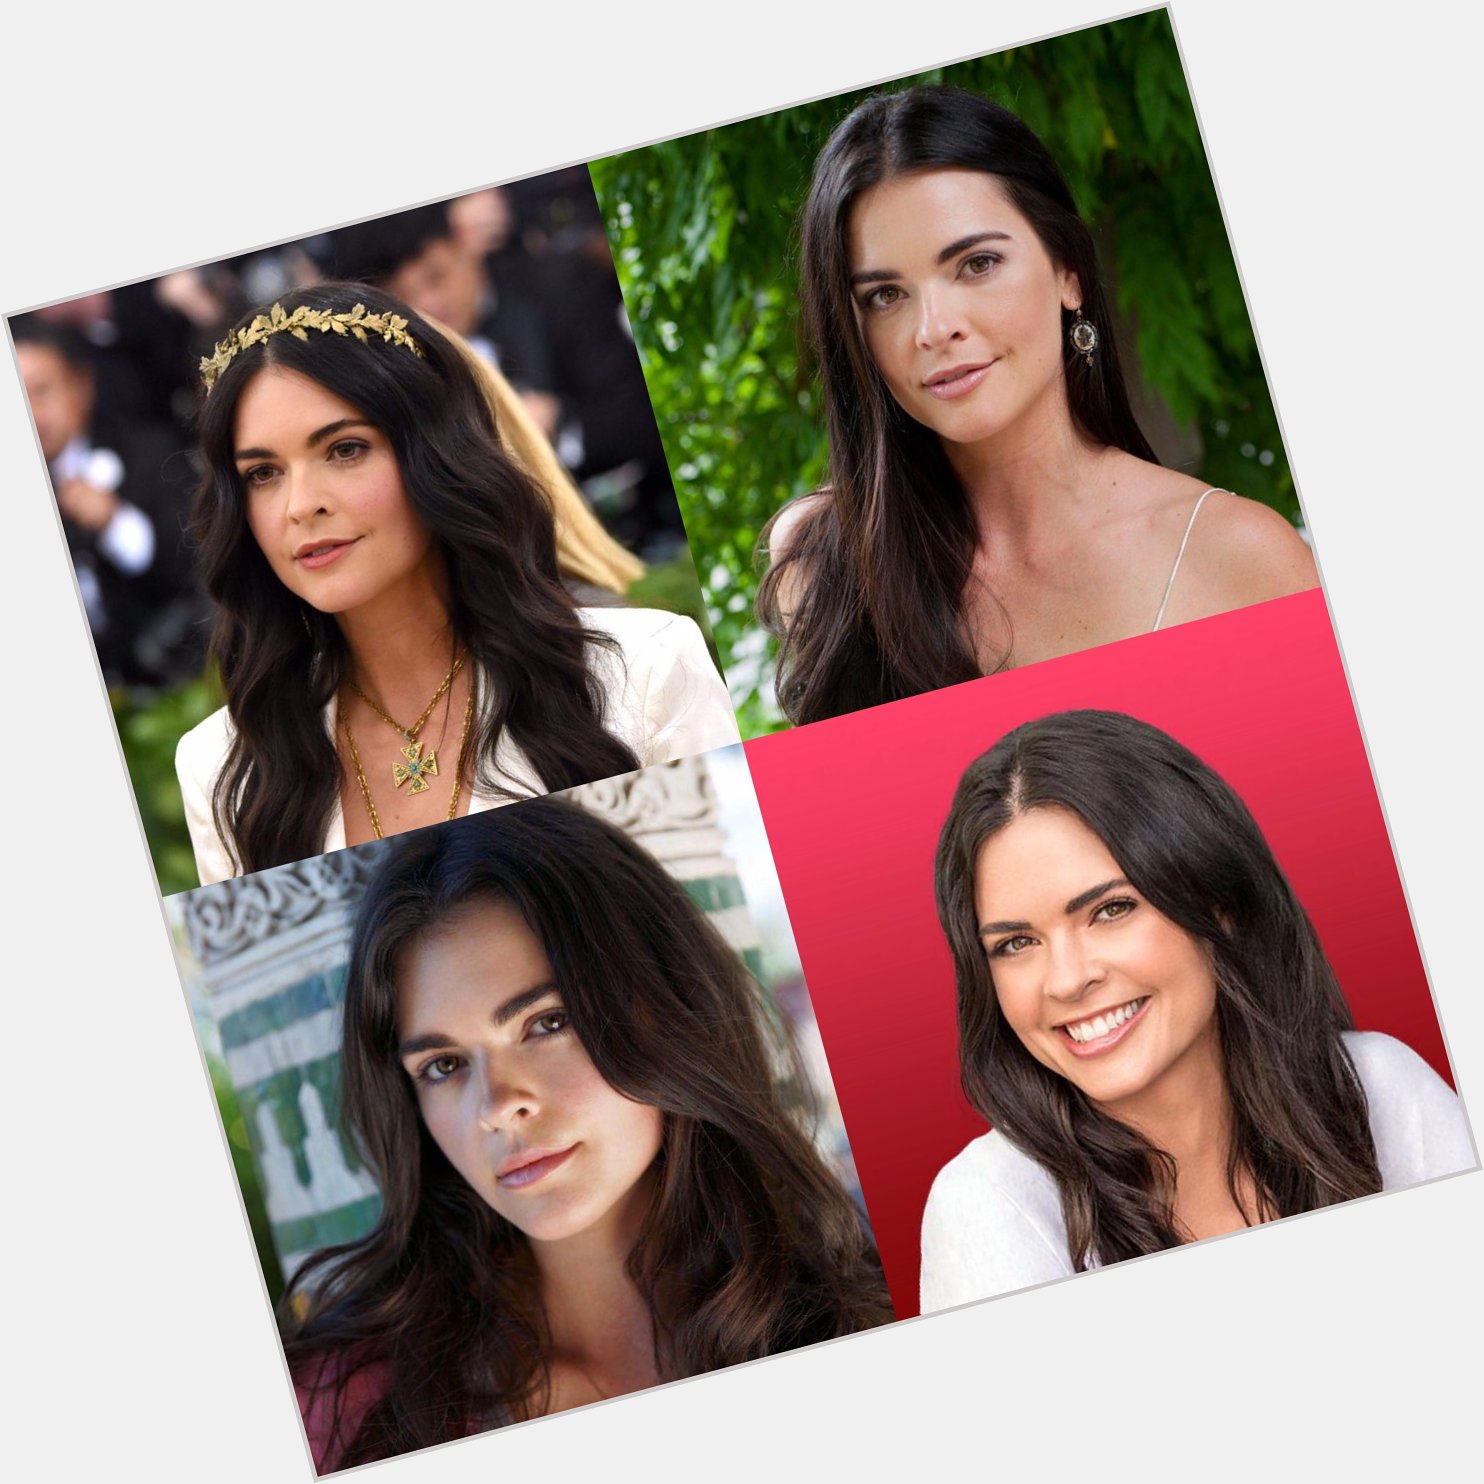 Happy 39 birthday to Katie Lee . Hope that she has a wonderful birthday.        